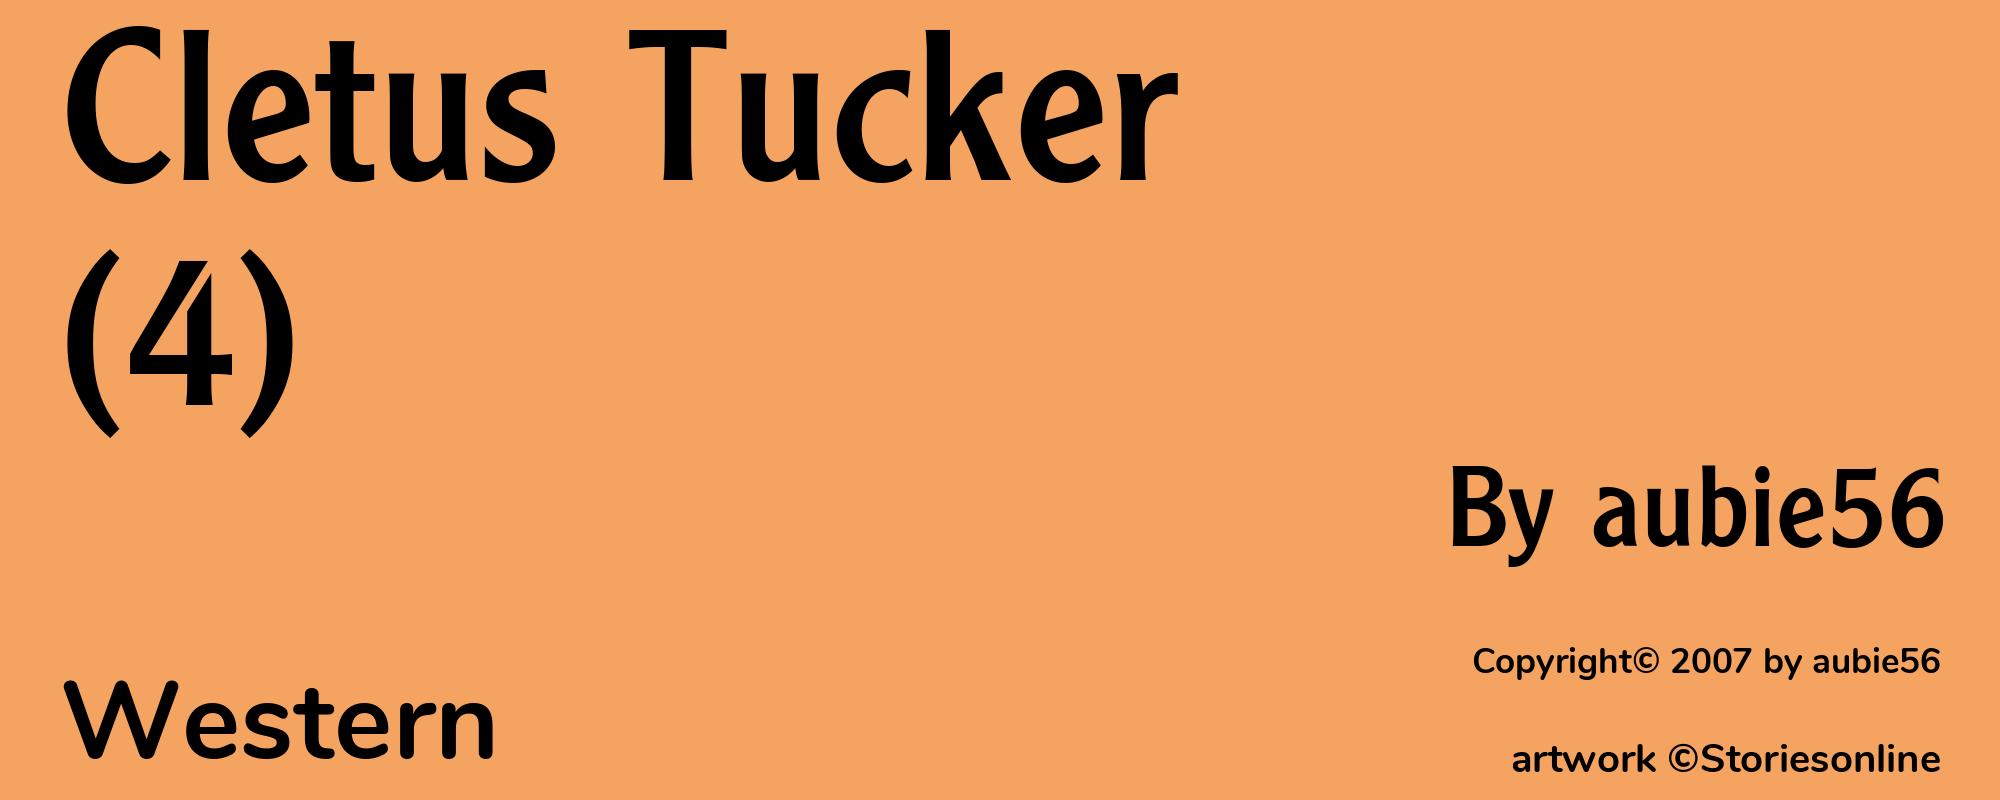 Cletus Tucker(4) - Cover